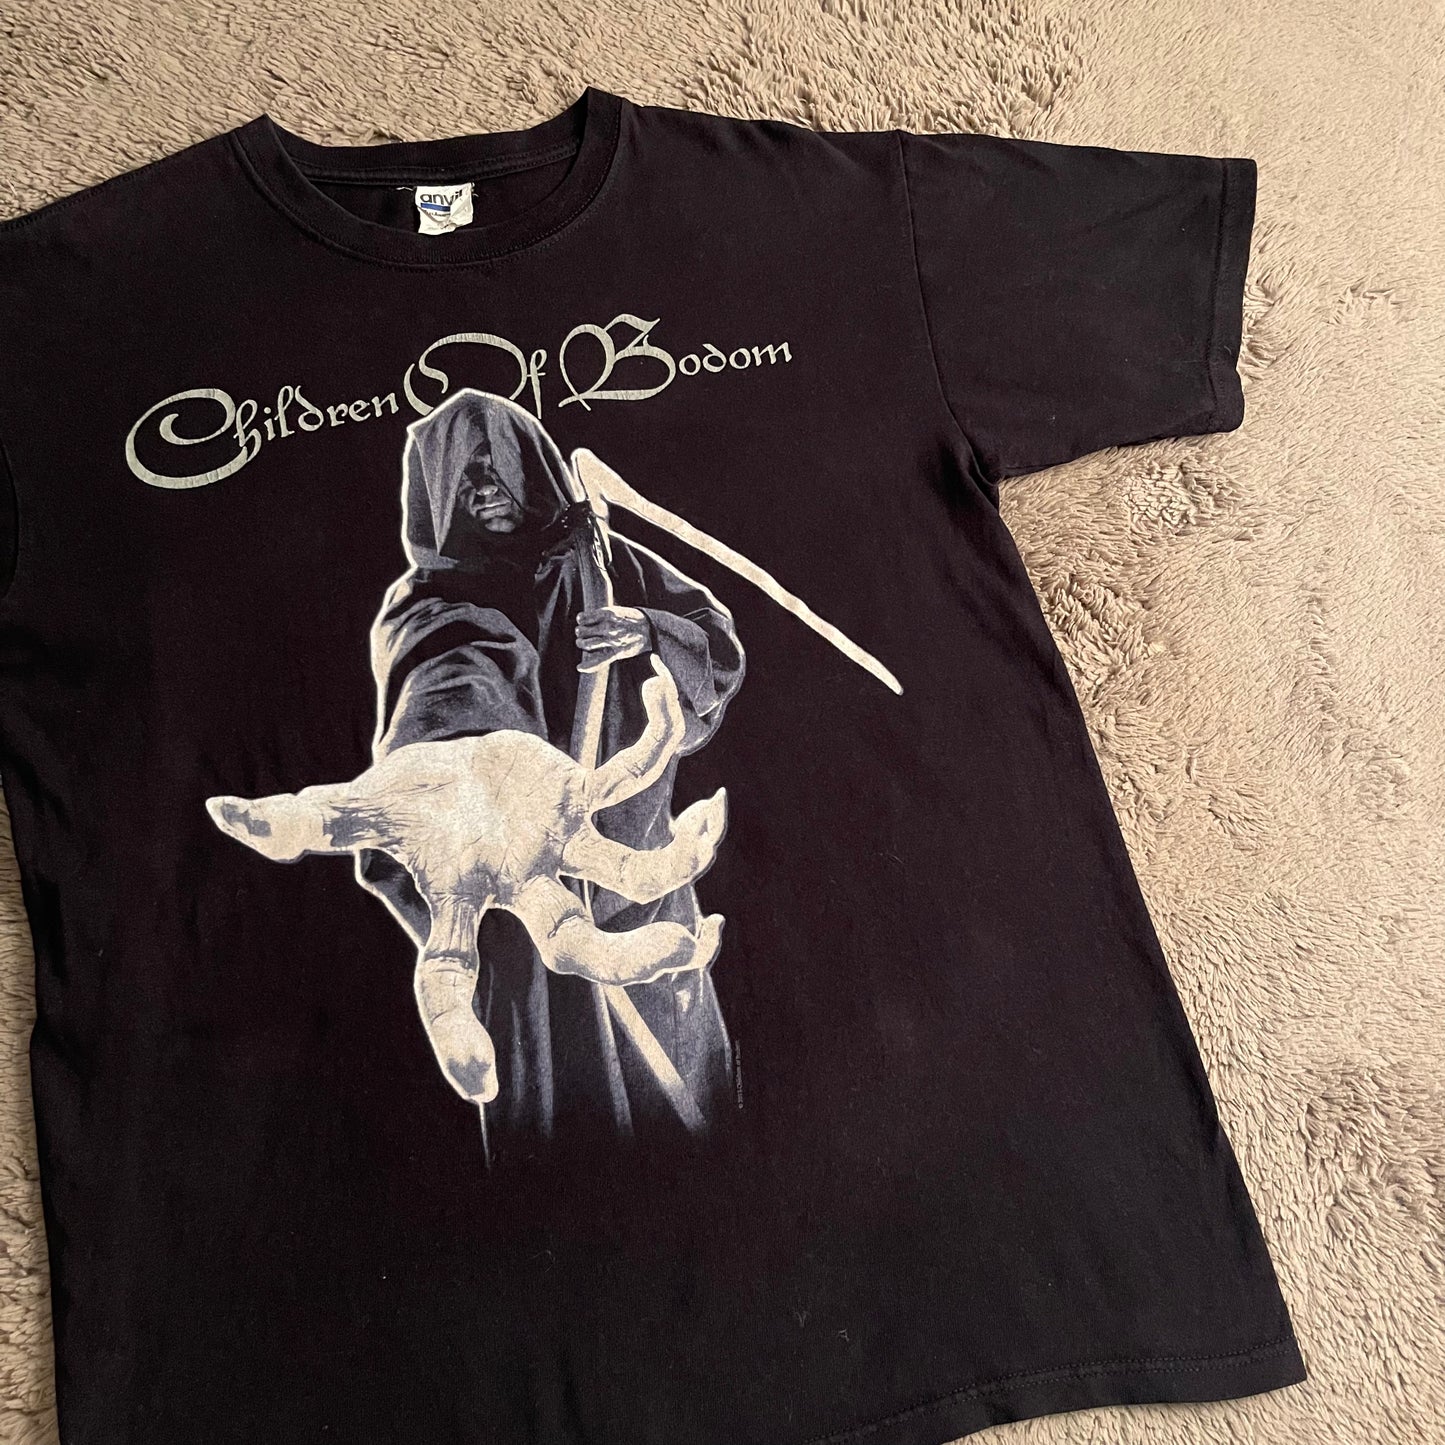 Children of Bodom Band Tee (L)